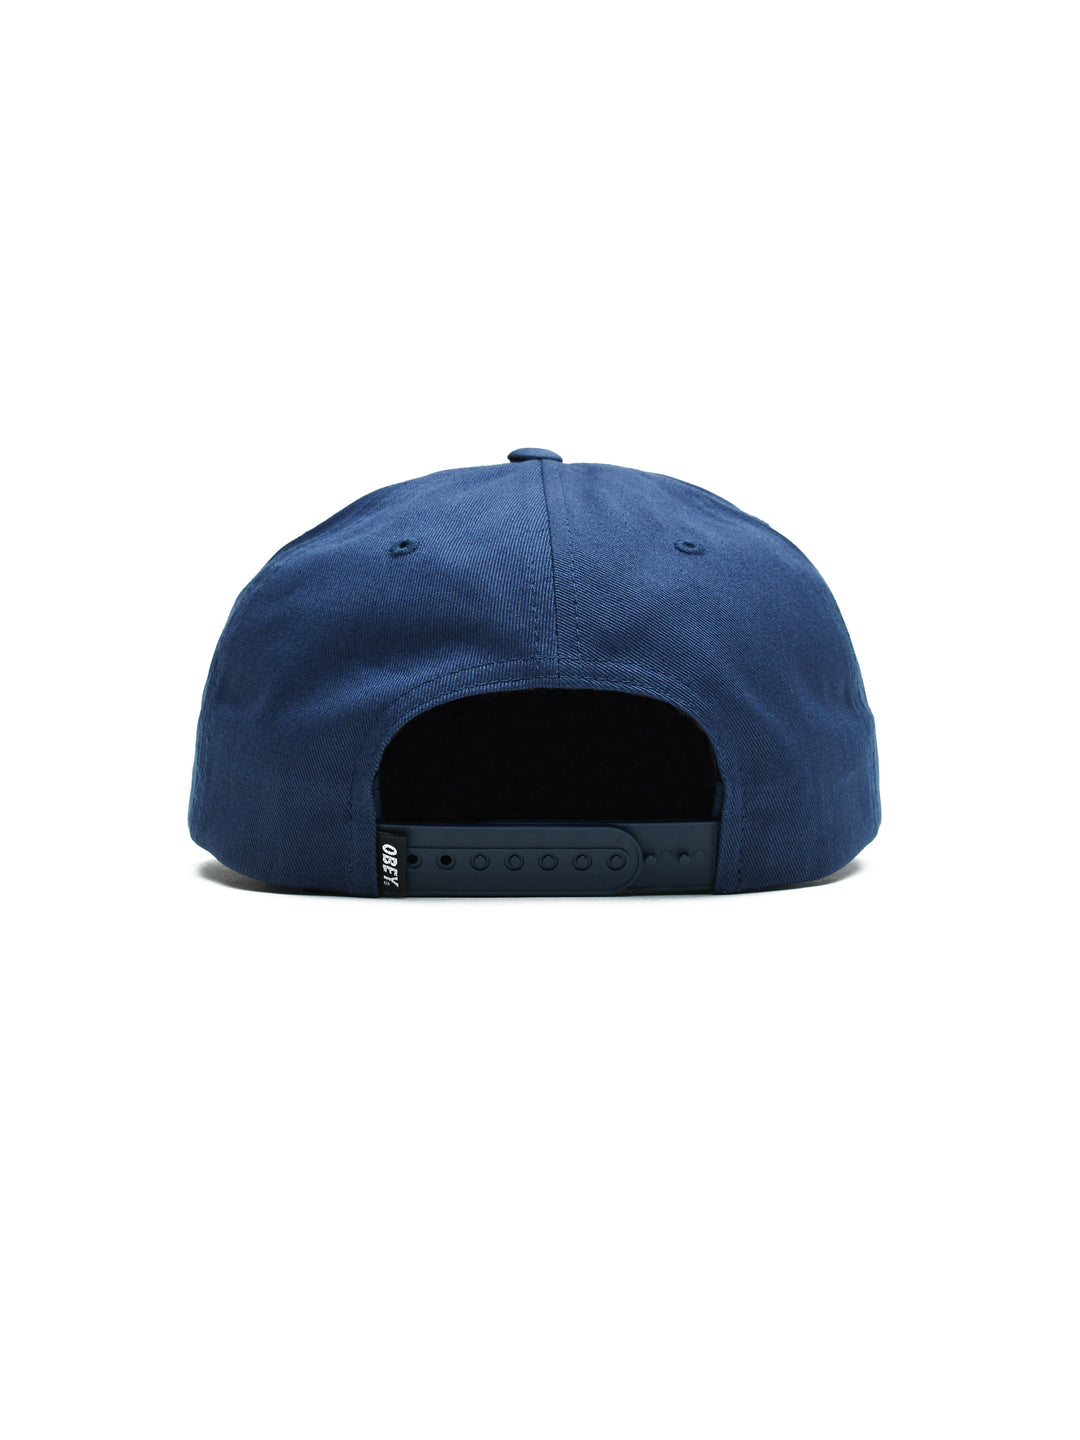 Gravity Snapback | Navy - West of Camden - Main Image Number 2 of 2